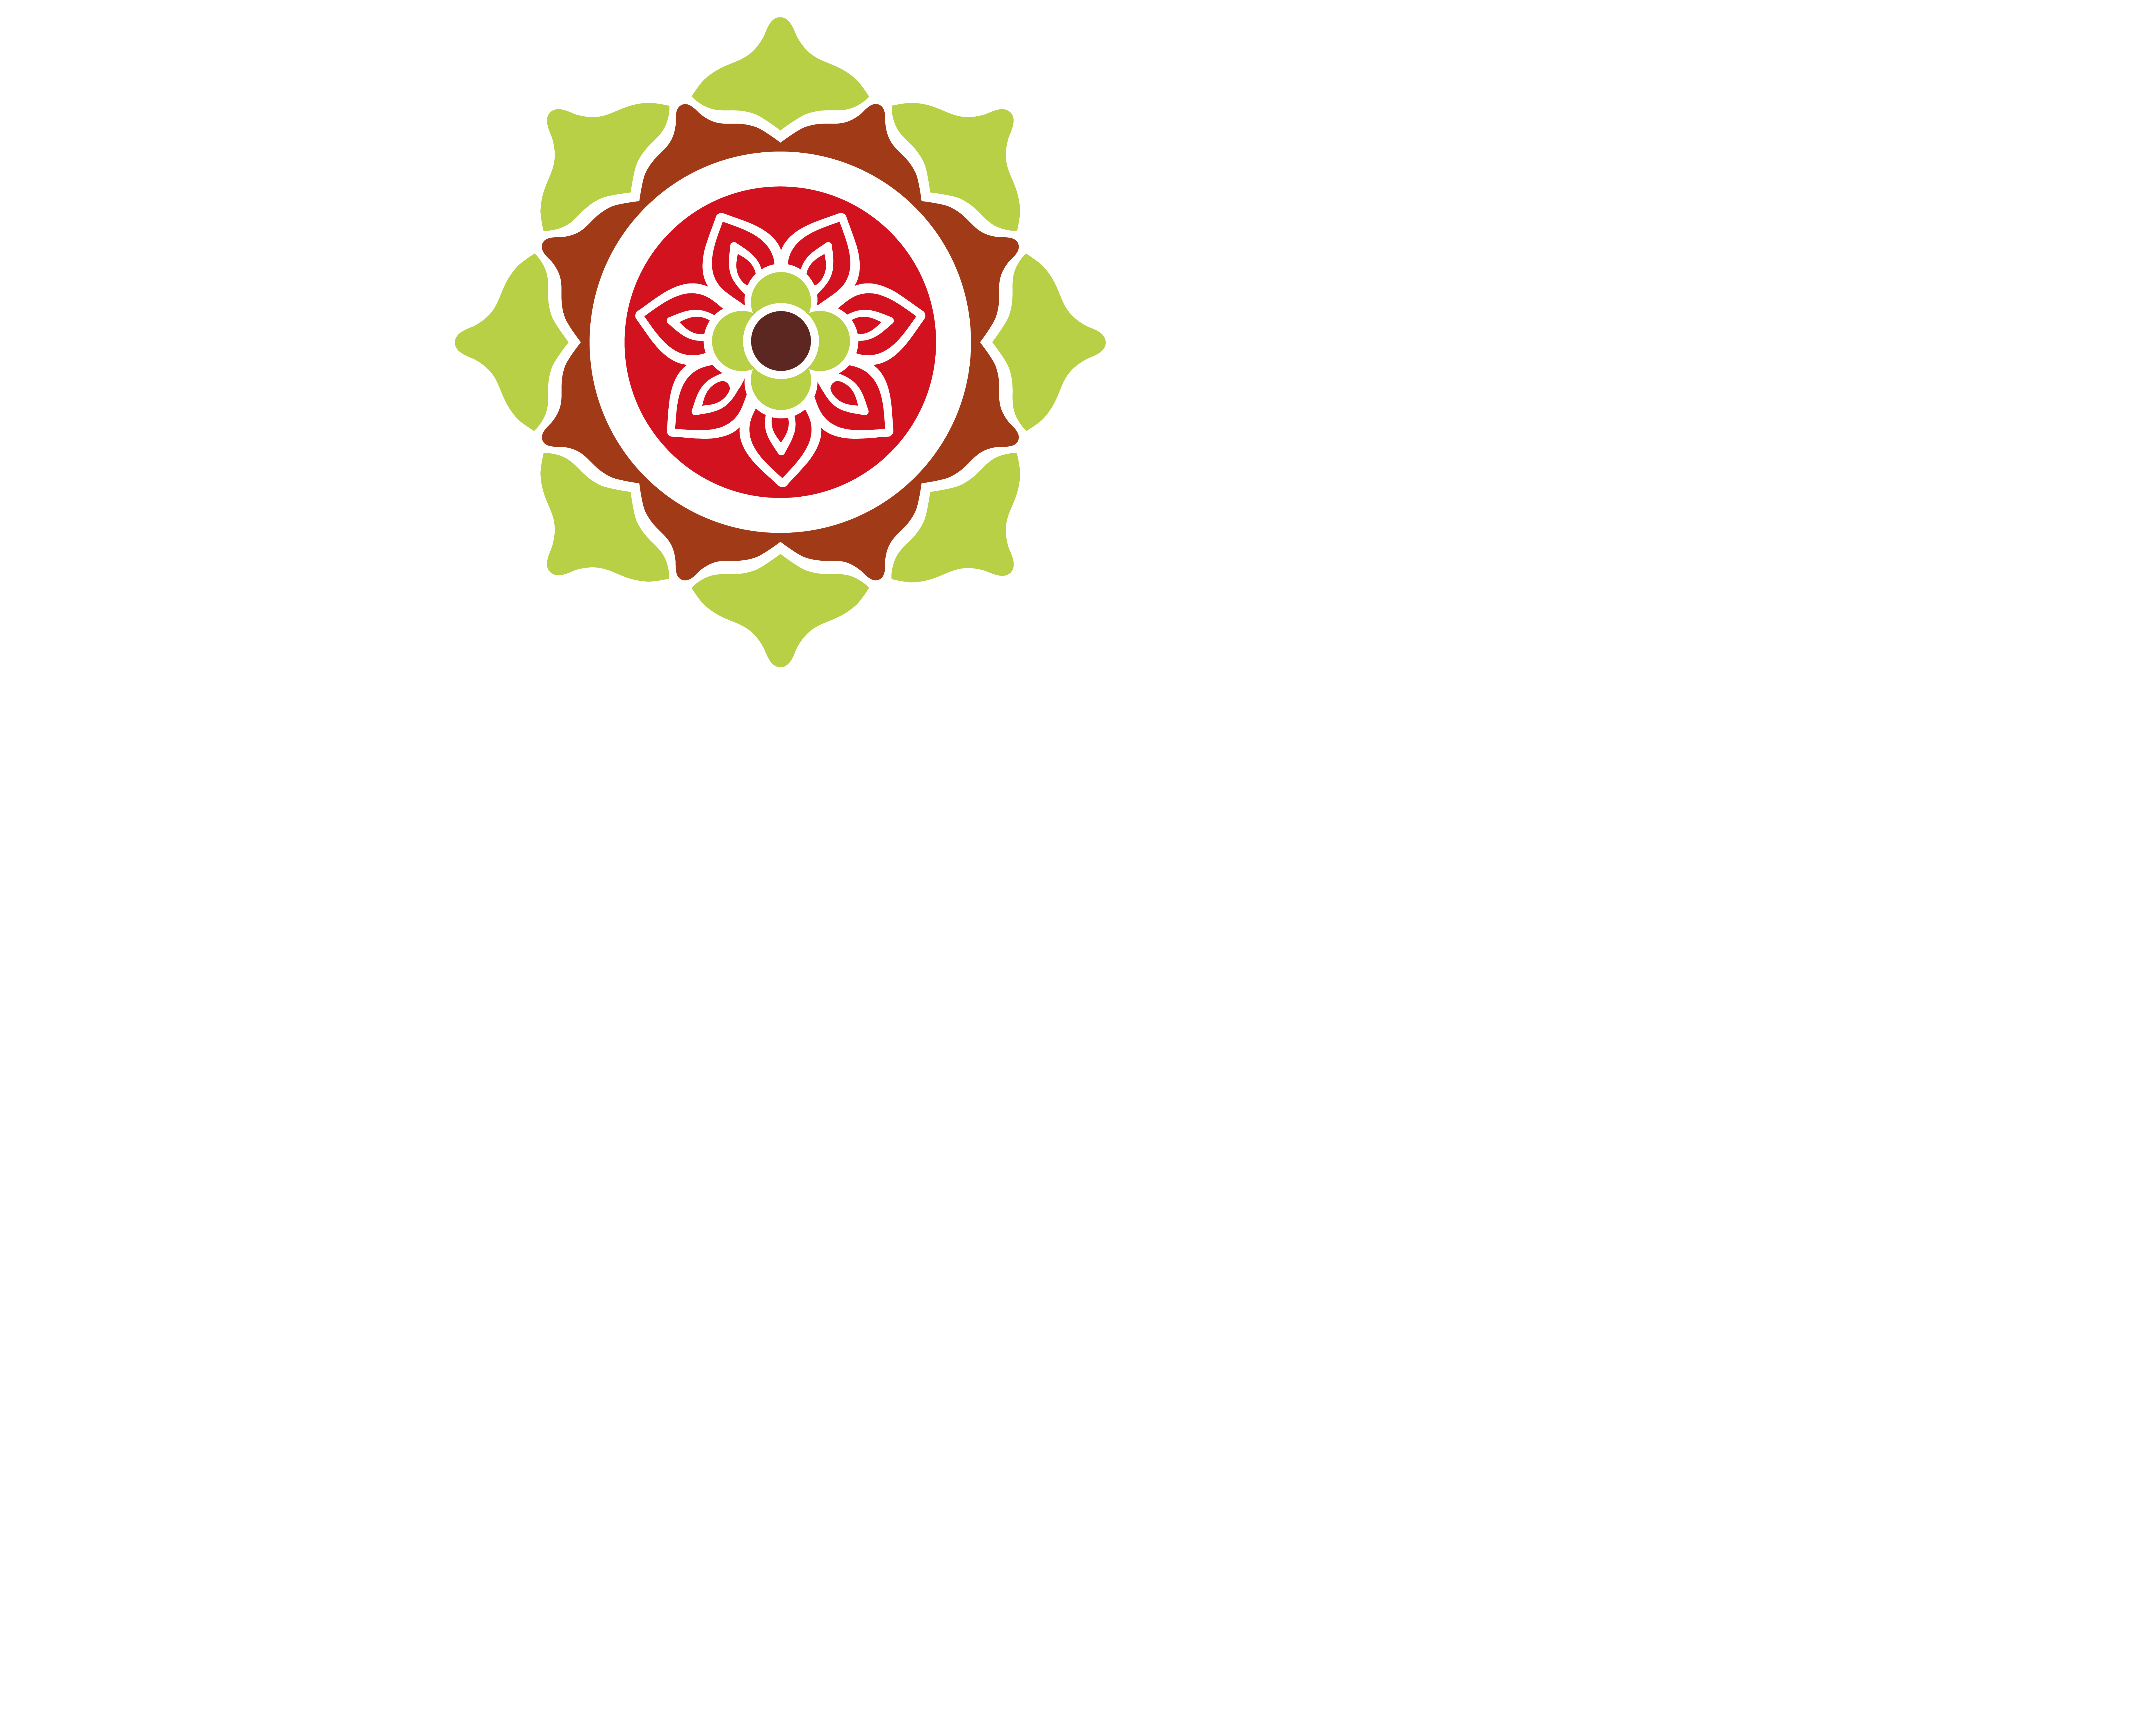 A black sign with white text and a stylish flower design representing CLUB and Sardinia with a plant